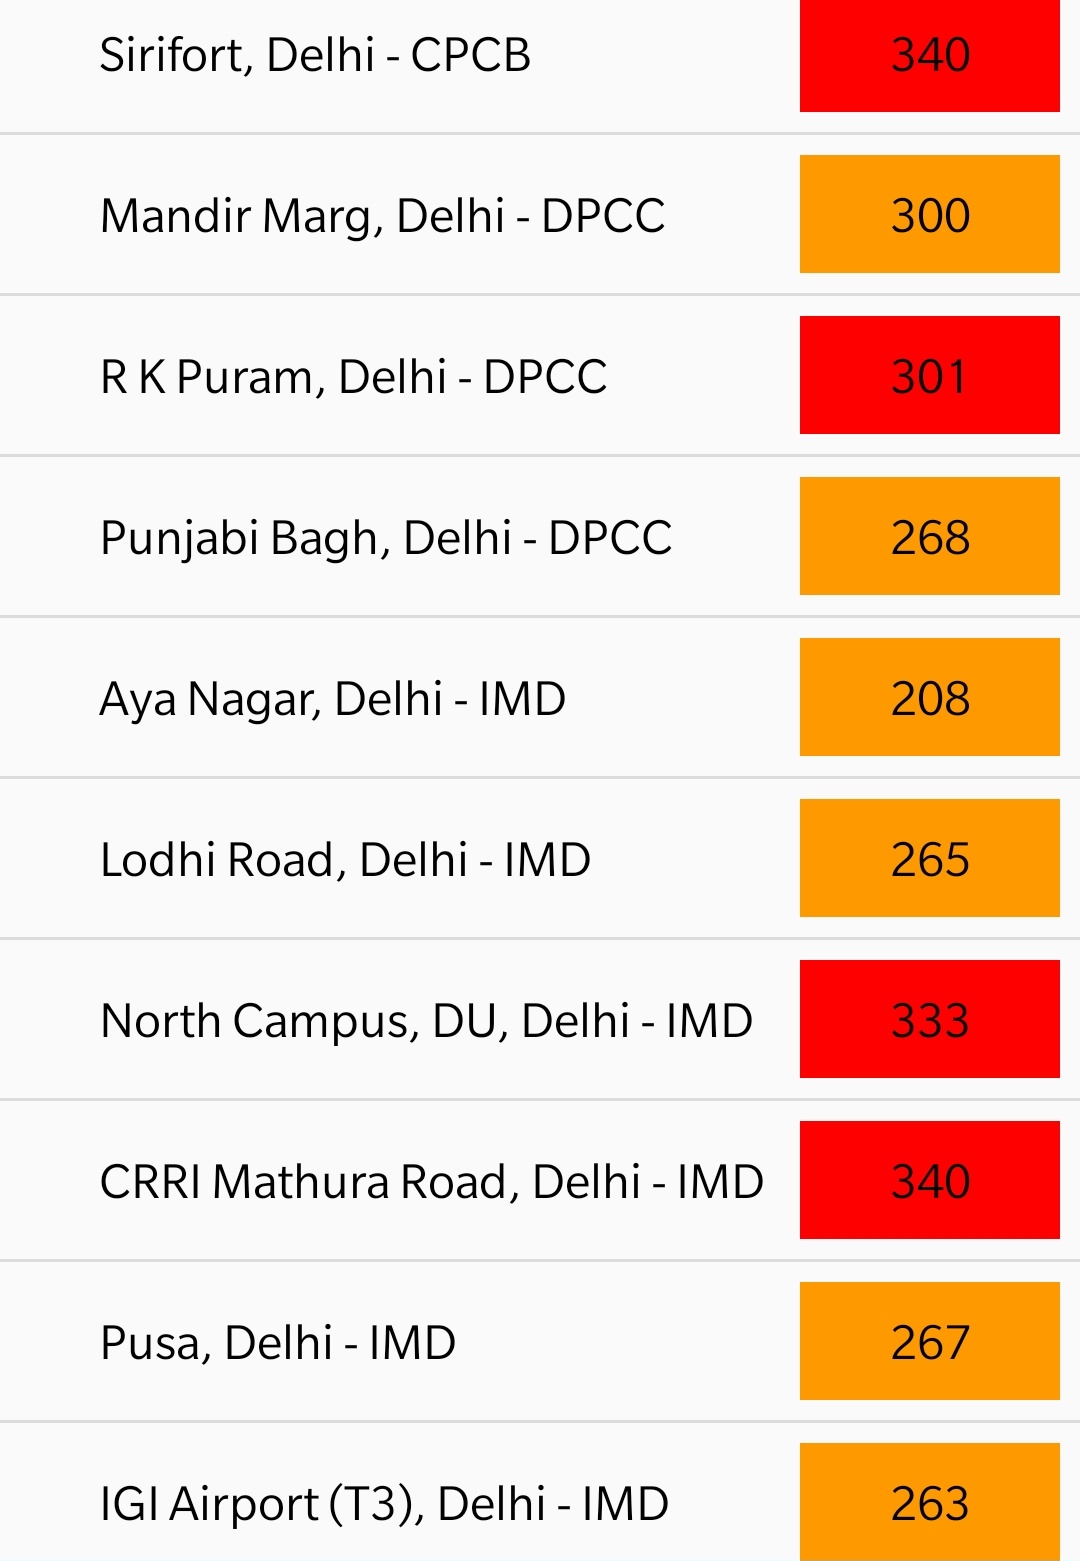 Pollution level increased in Delhi NCR